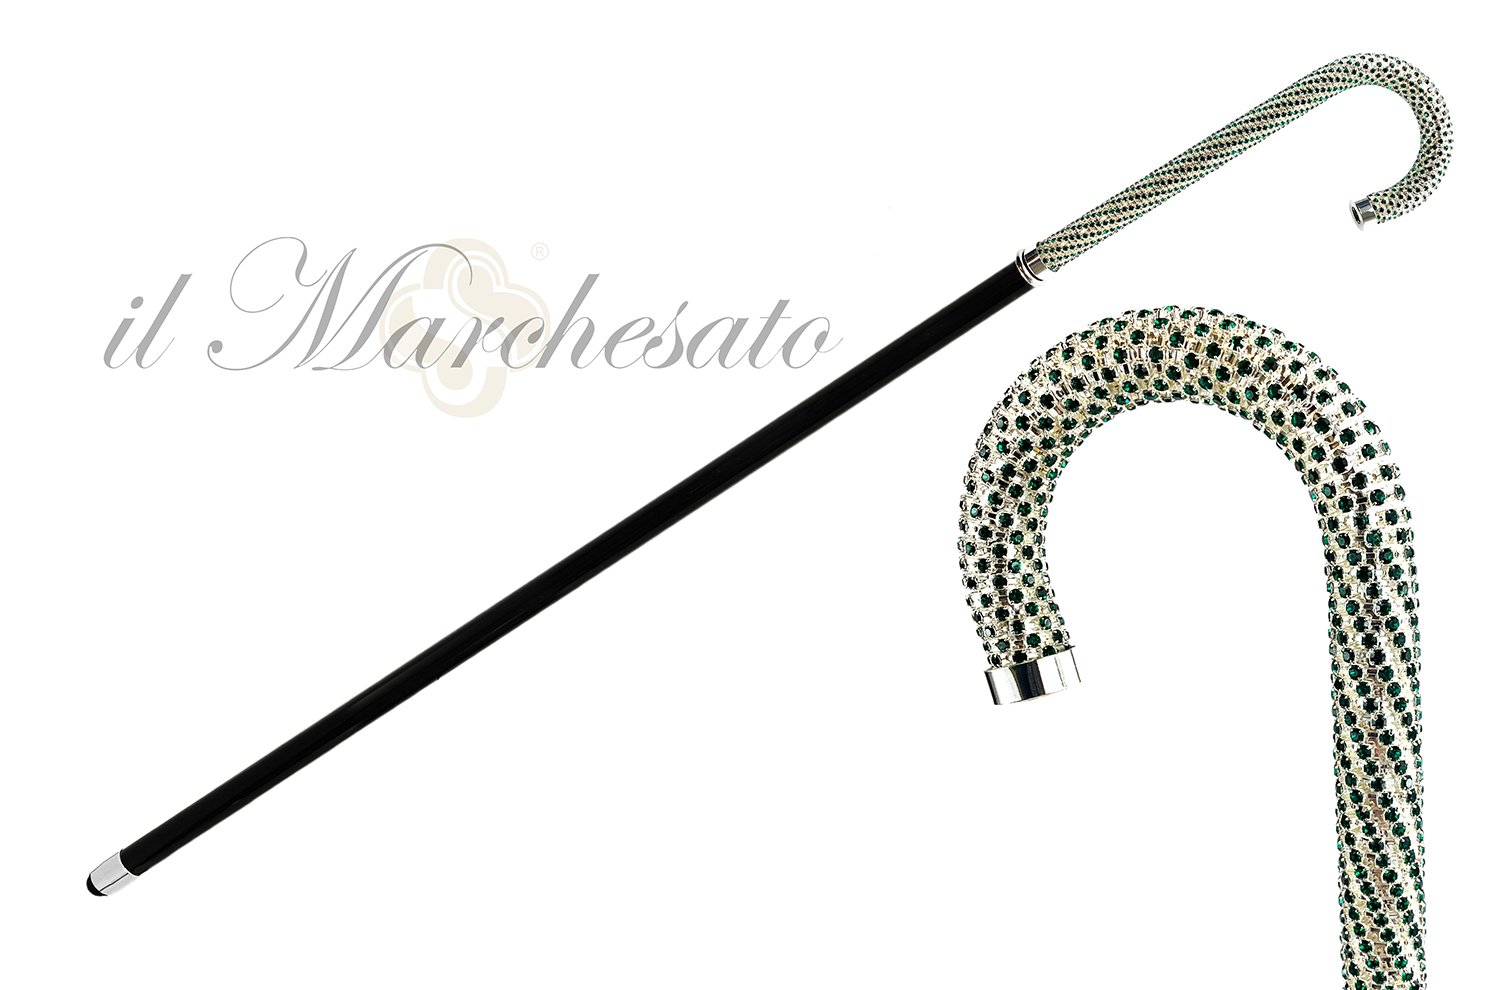 Luxury Walking stick Encrusted with hundreds Green Crystals - IL MARCHESATO LUXURY UMBRELLAS, CANES AND SHOEHORNS